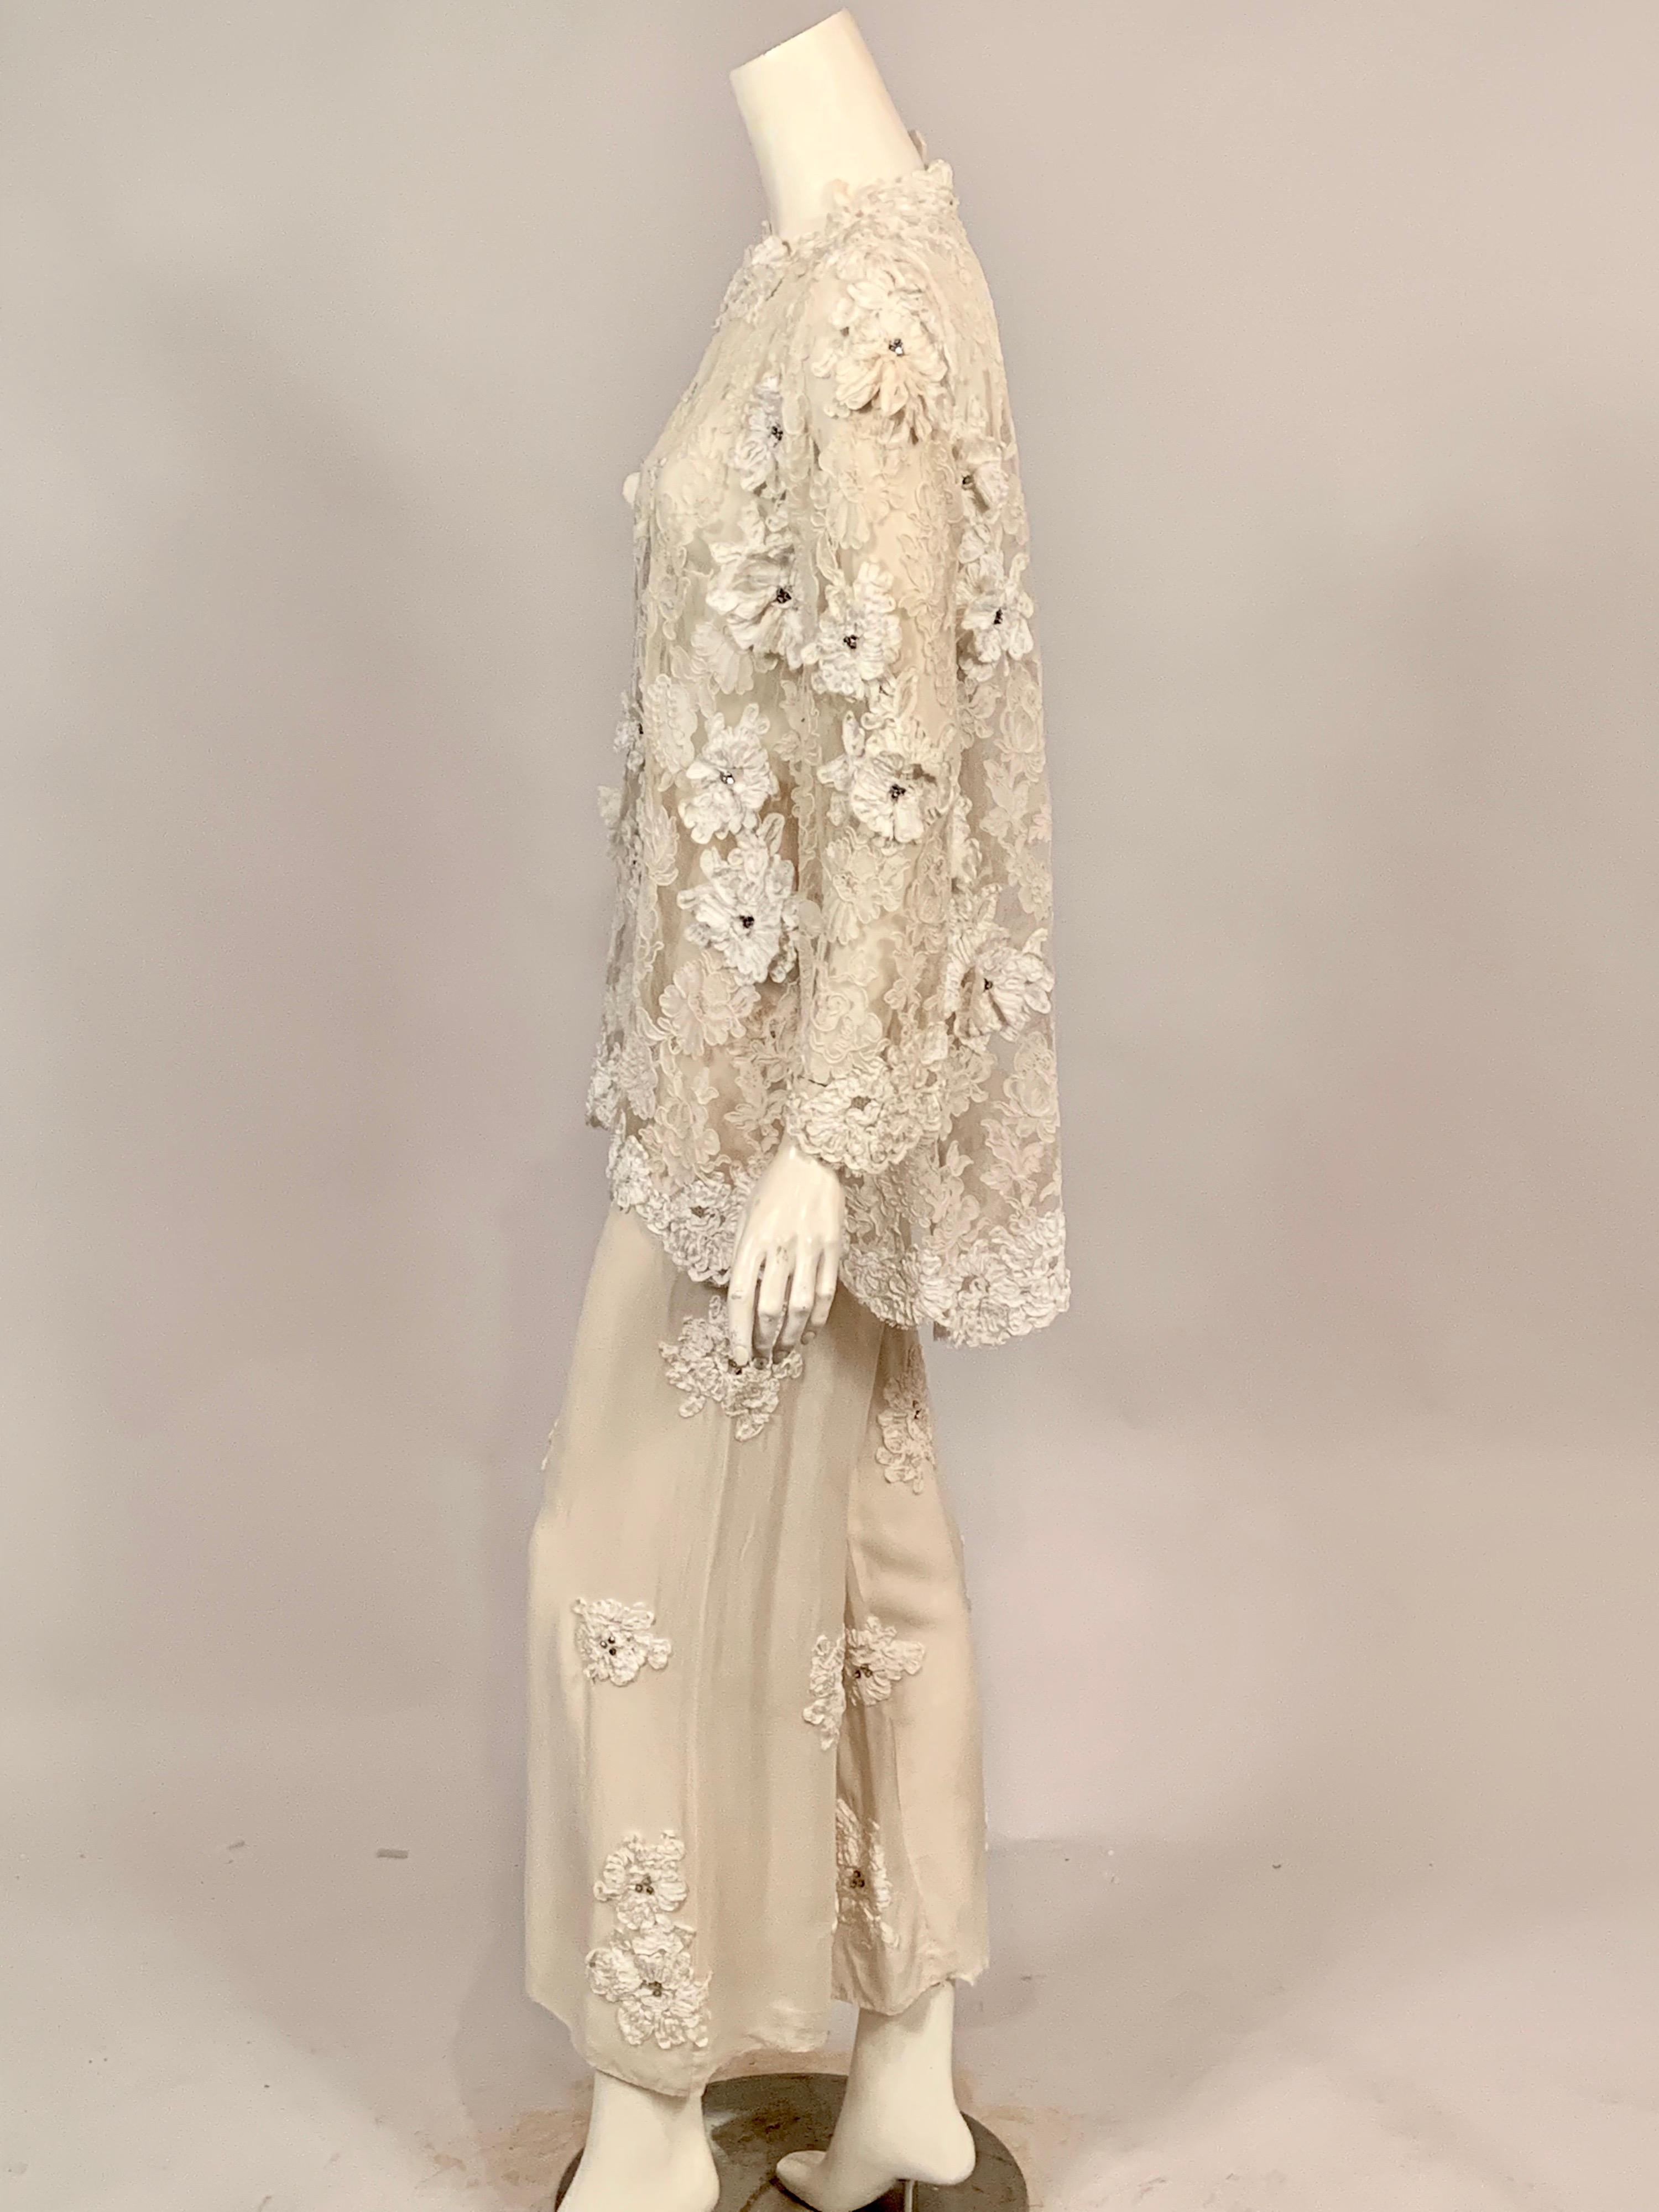 Women's 1970's Ivory Lace Tunic and Chiffon Pants with Ribbon and Rhinestone Appliques